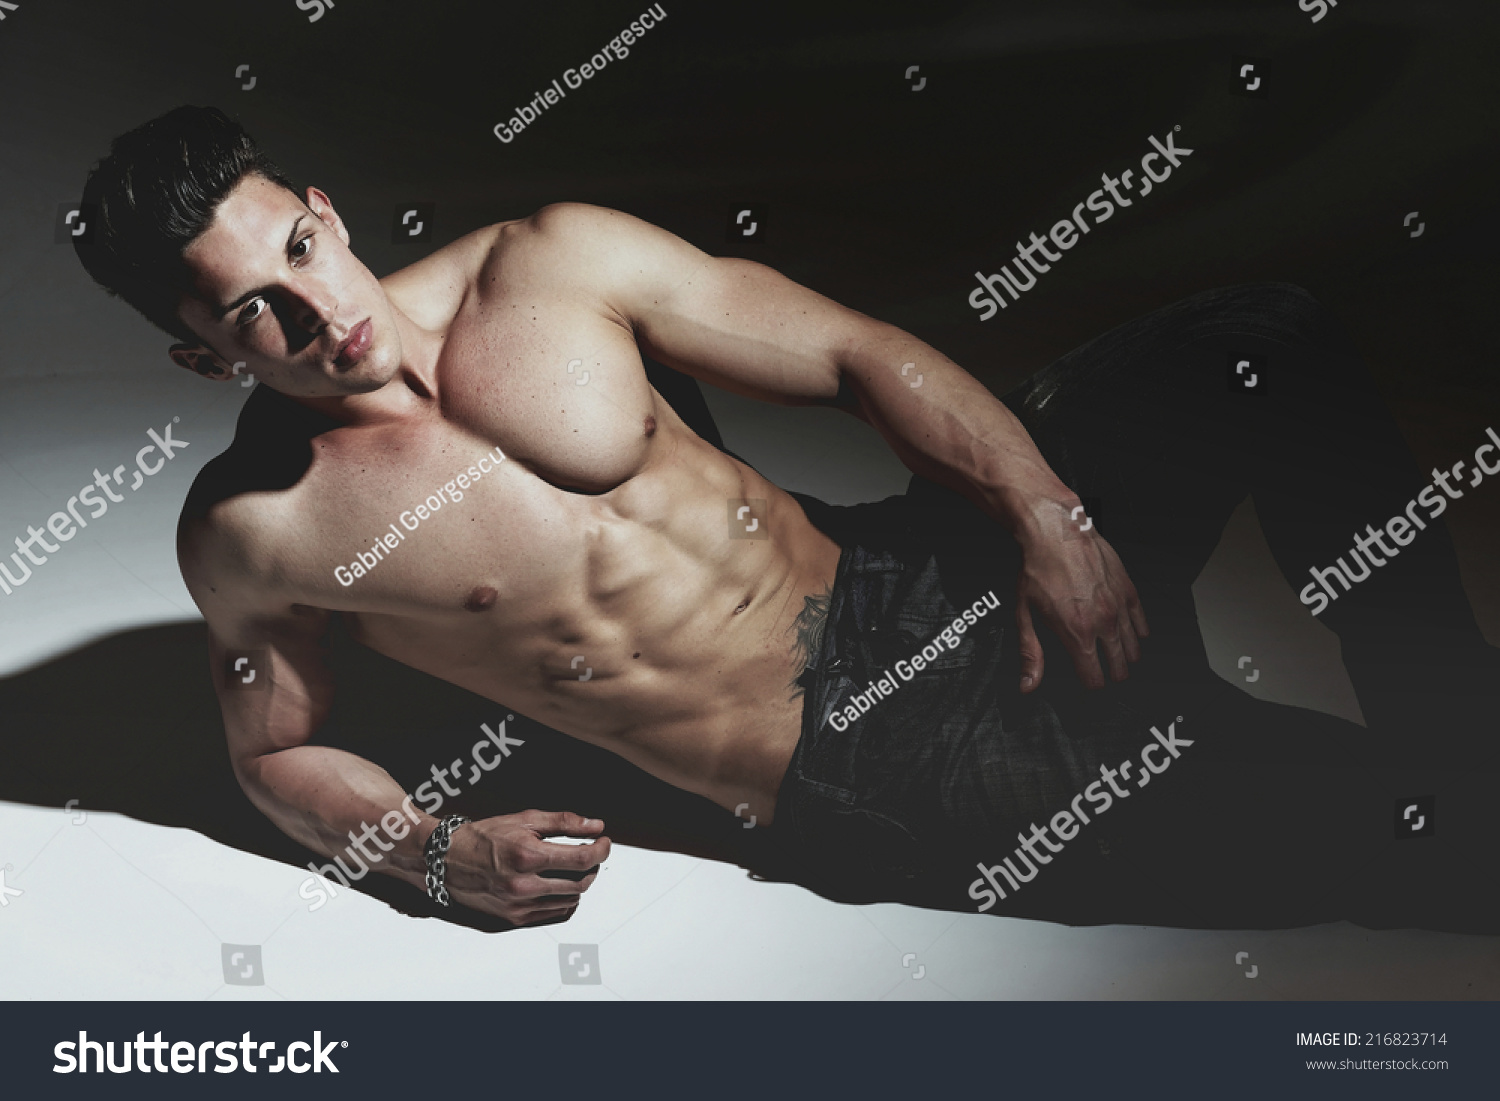 Sexy Portrait Very Muscular Shirtless Male Stock Photo 216823714